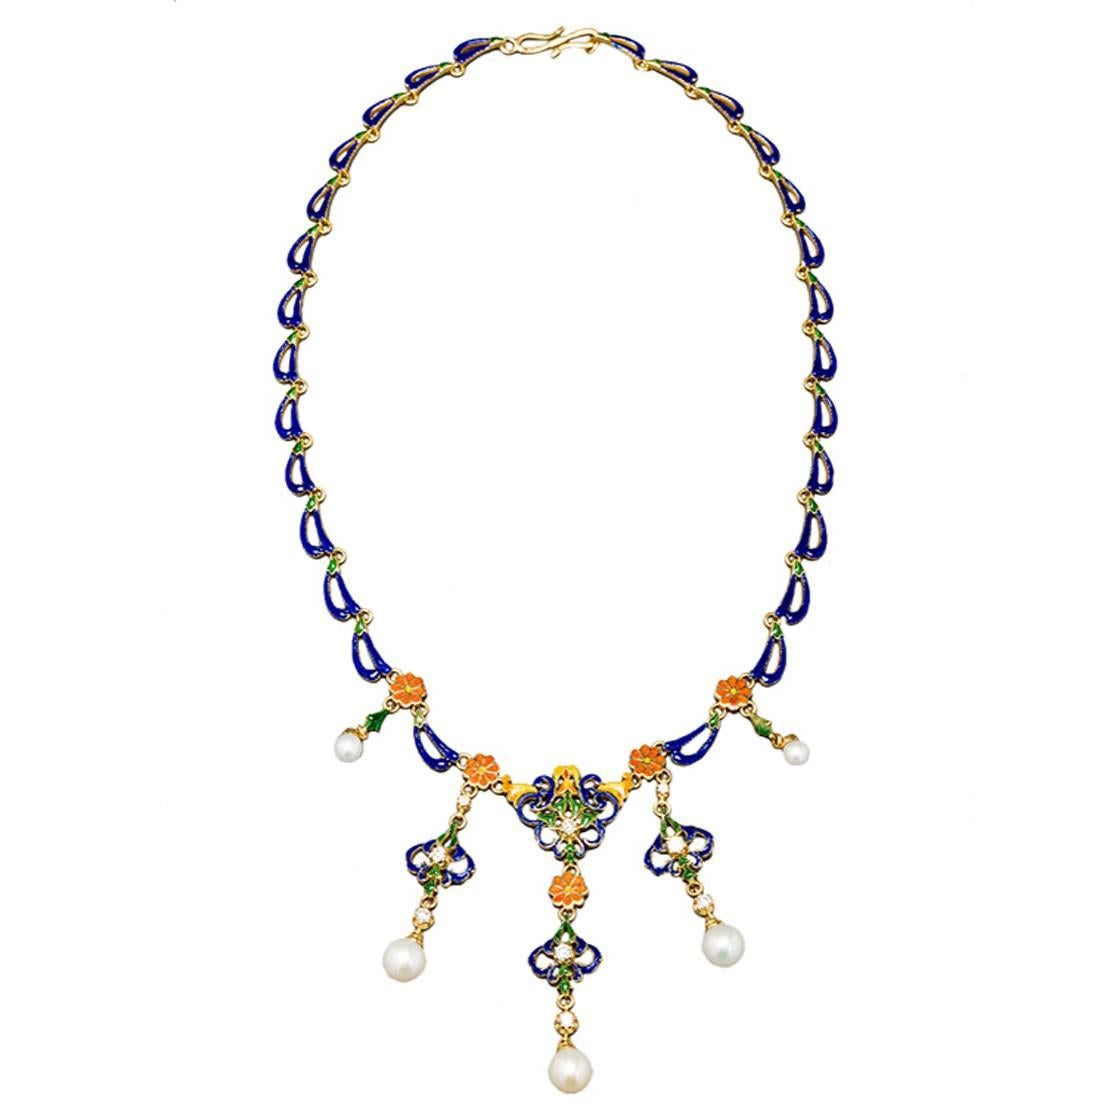 French Enameled Pearl Diamond 18k Gold Garland Necklace, 20th century